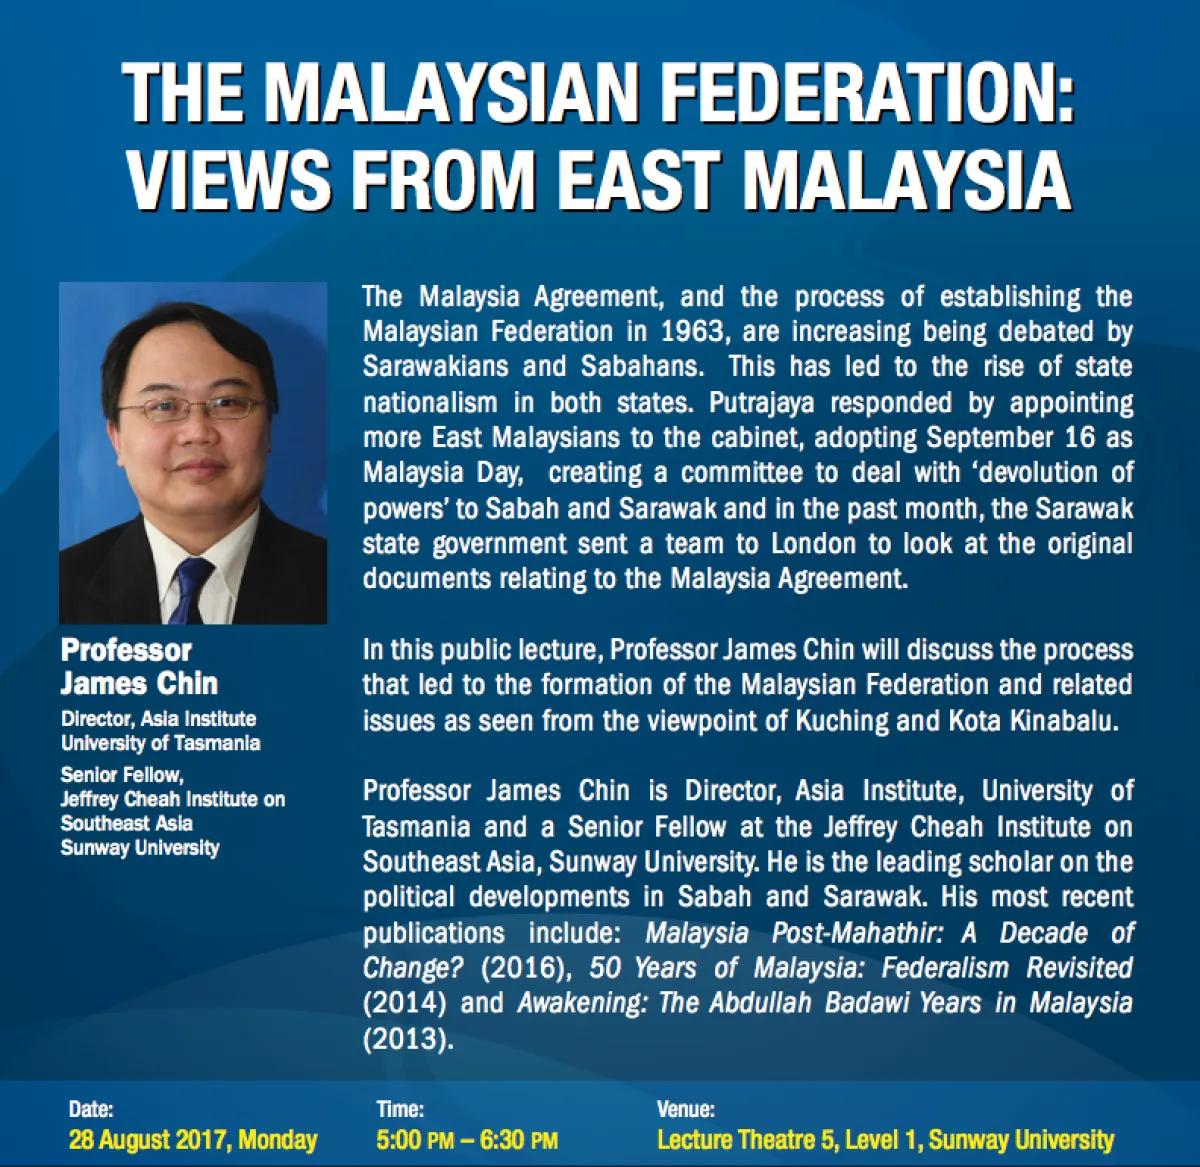 The Malaysian Federation: Views From East Malaysia